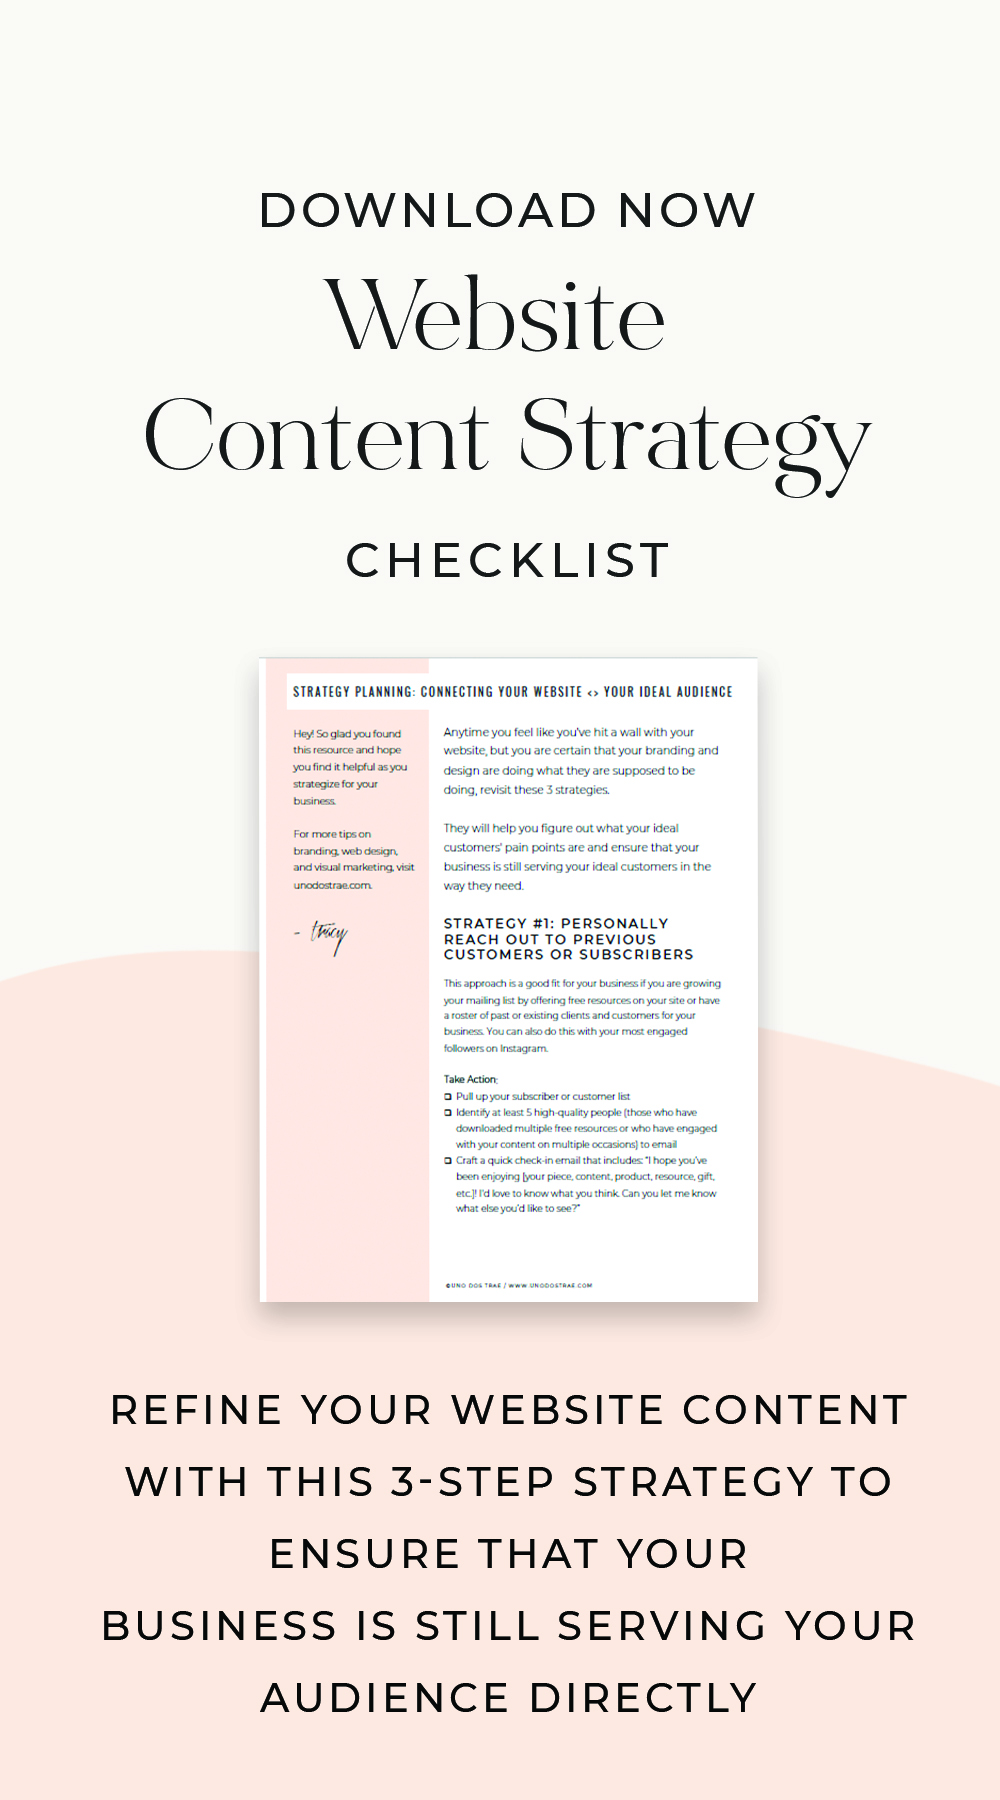 Download the Website Content Strategy Guide | Uno Dos Trae